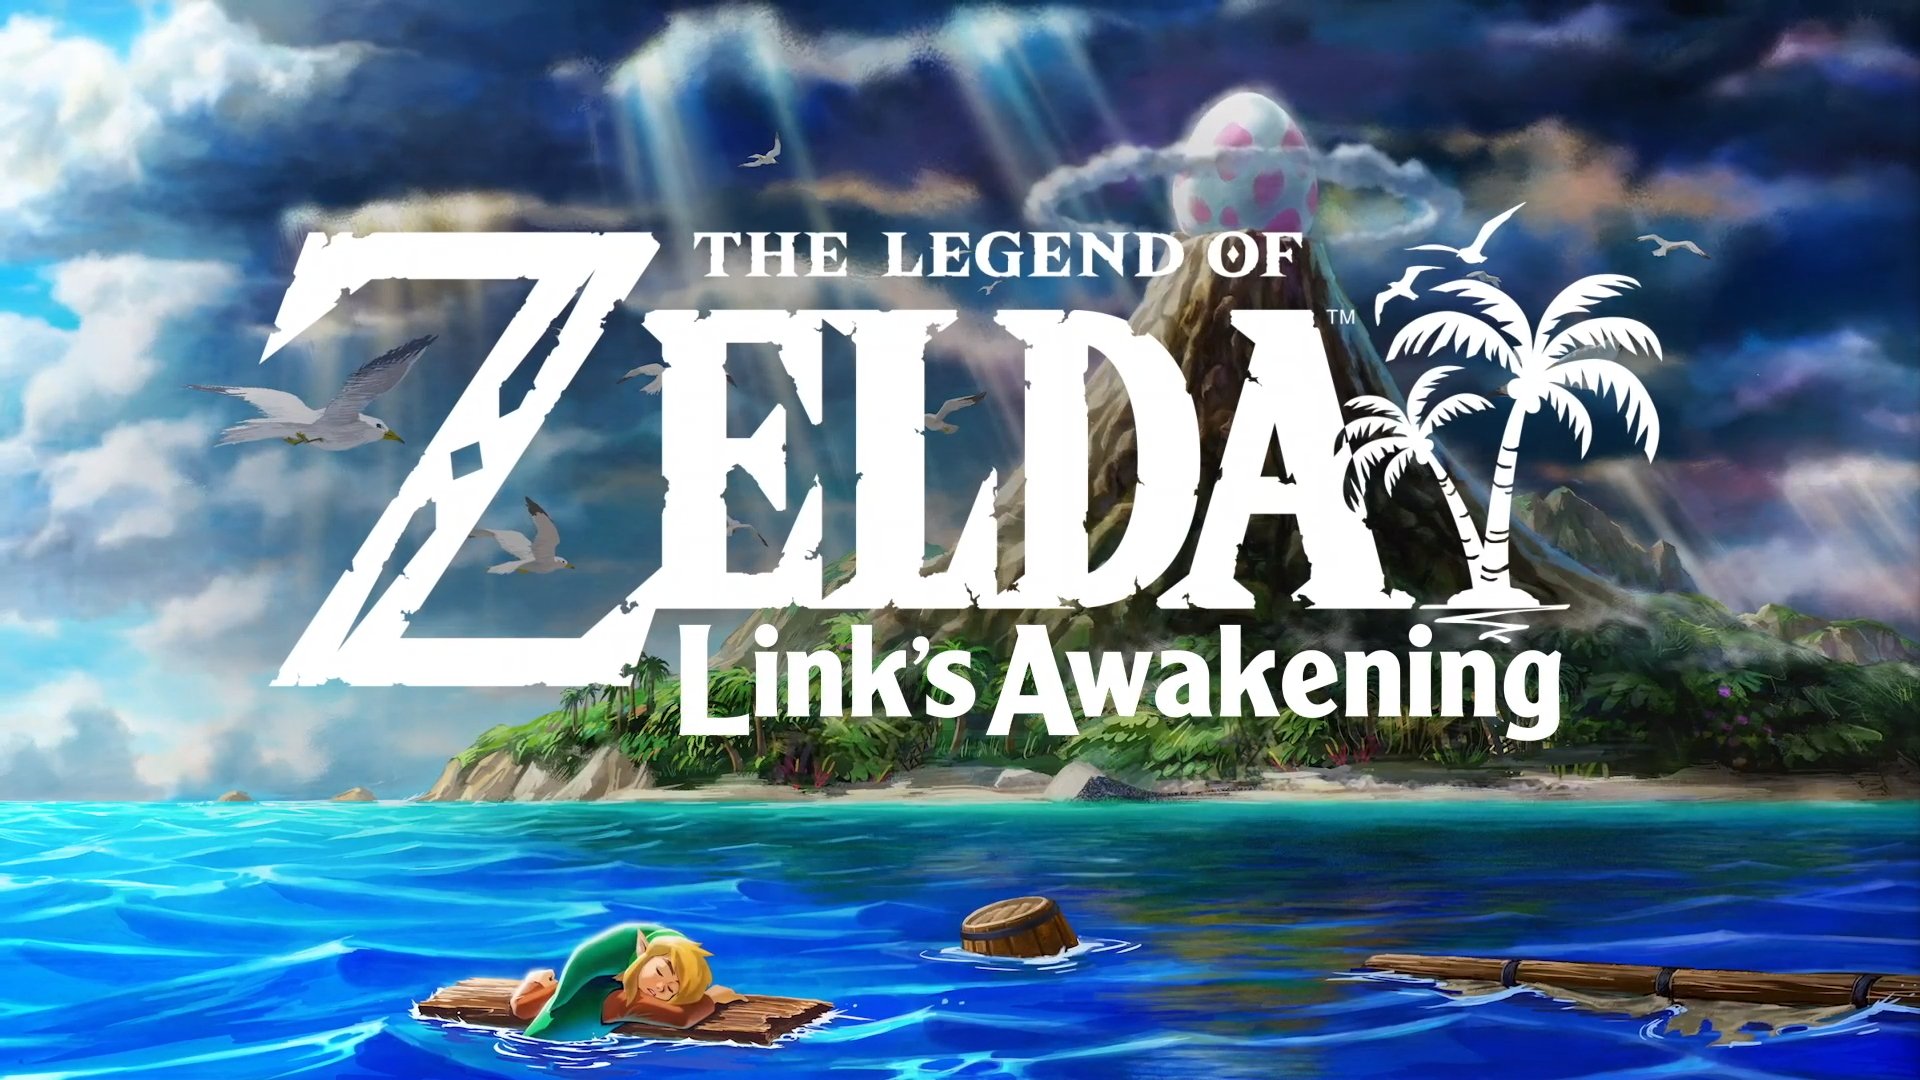 The Legend of Zelda: Link’s Awakening Remake Announced for Switch